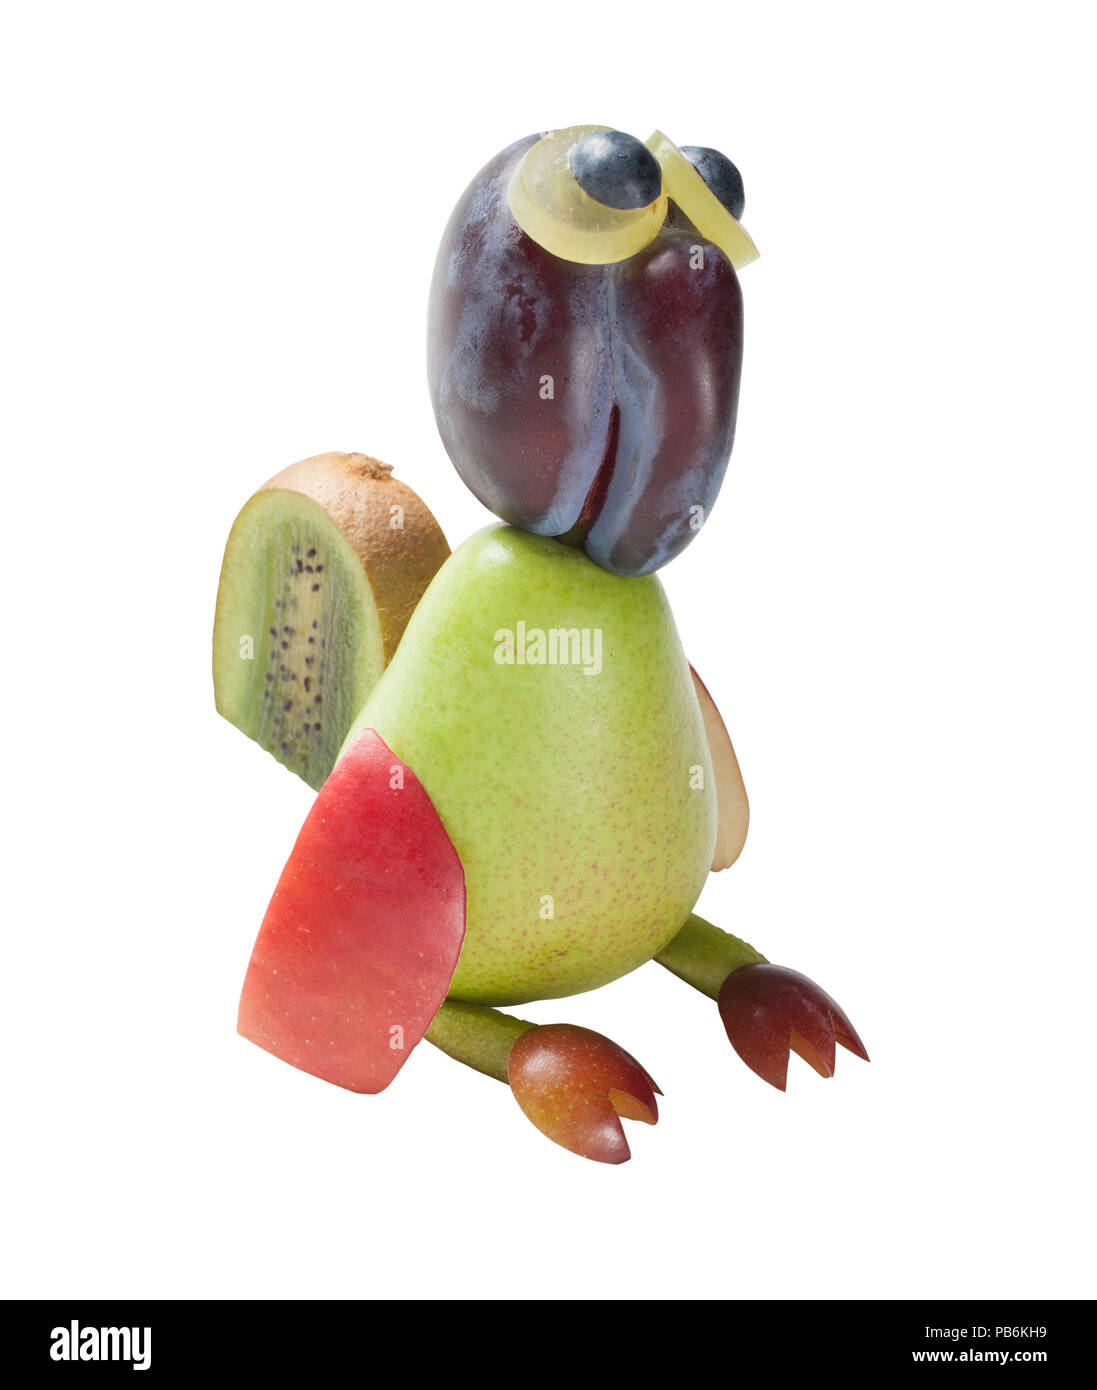 Funny parrot made with fresh fruits Stock Photo